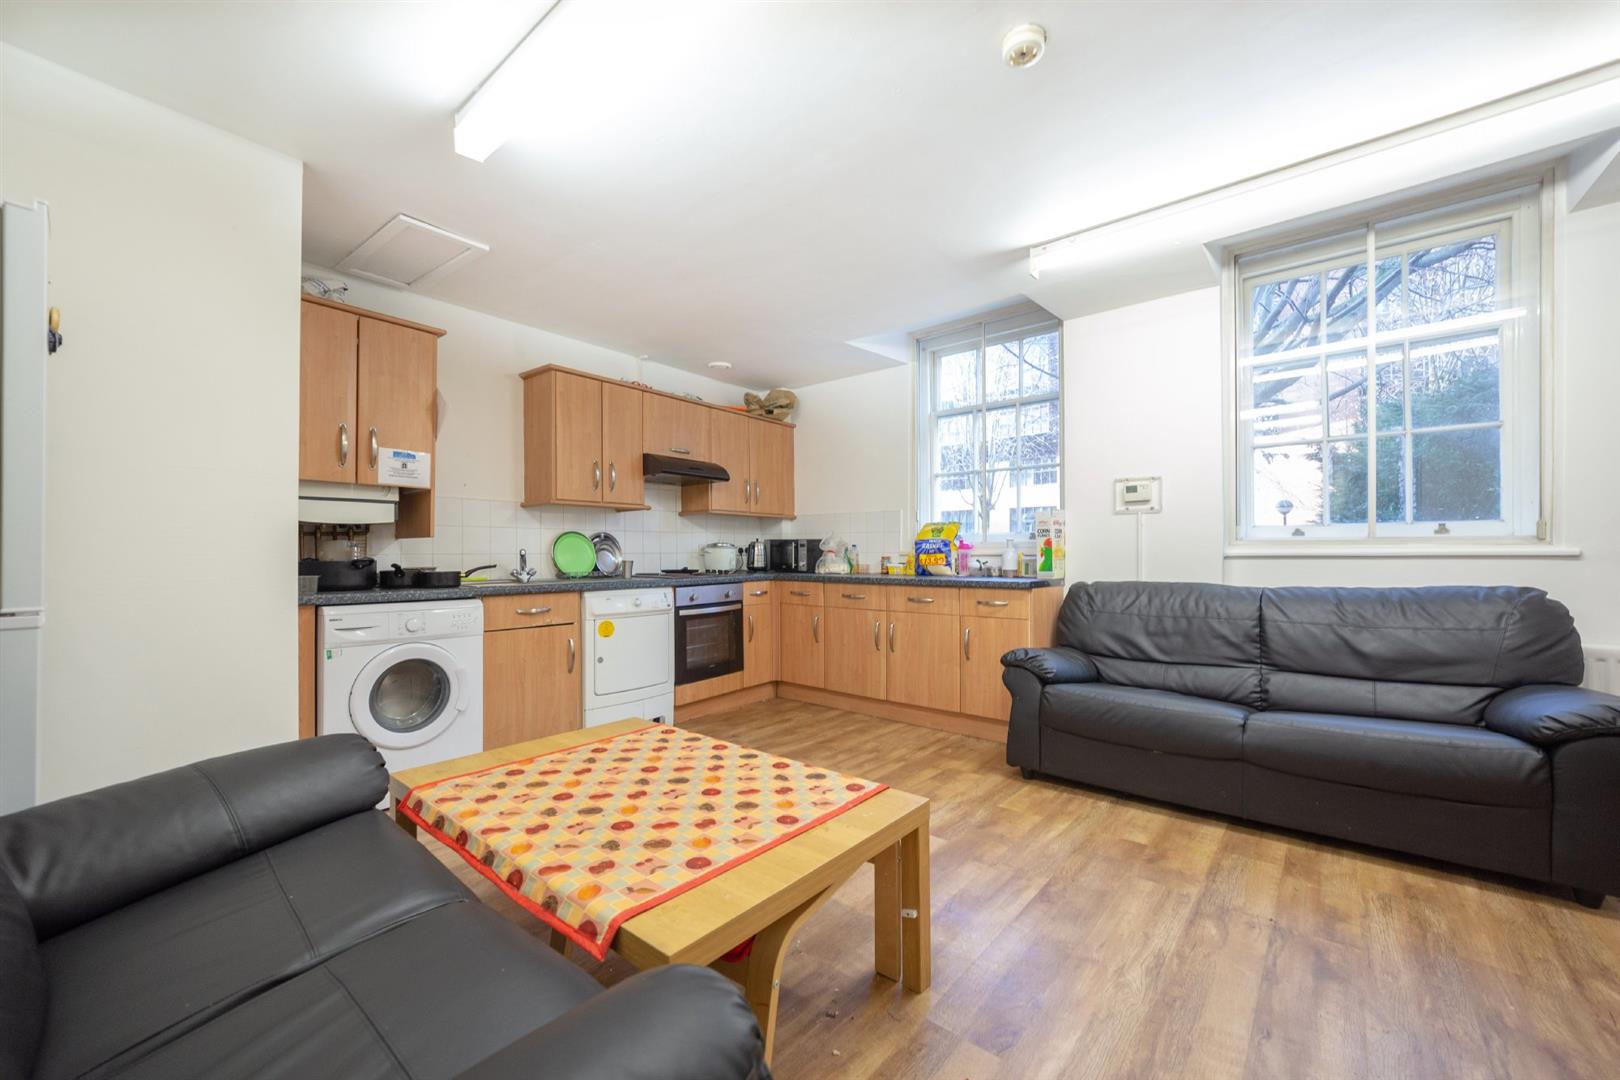 6 bed apartment to rent in Clayton Street West, City Centre  - Property Image 1